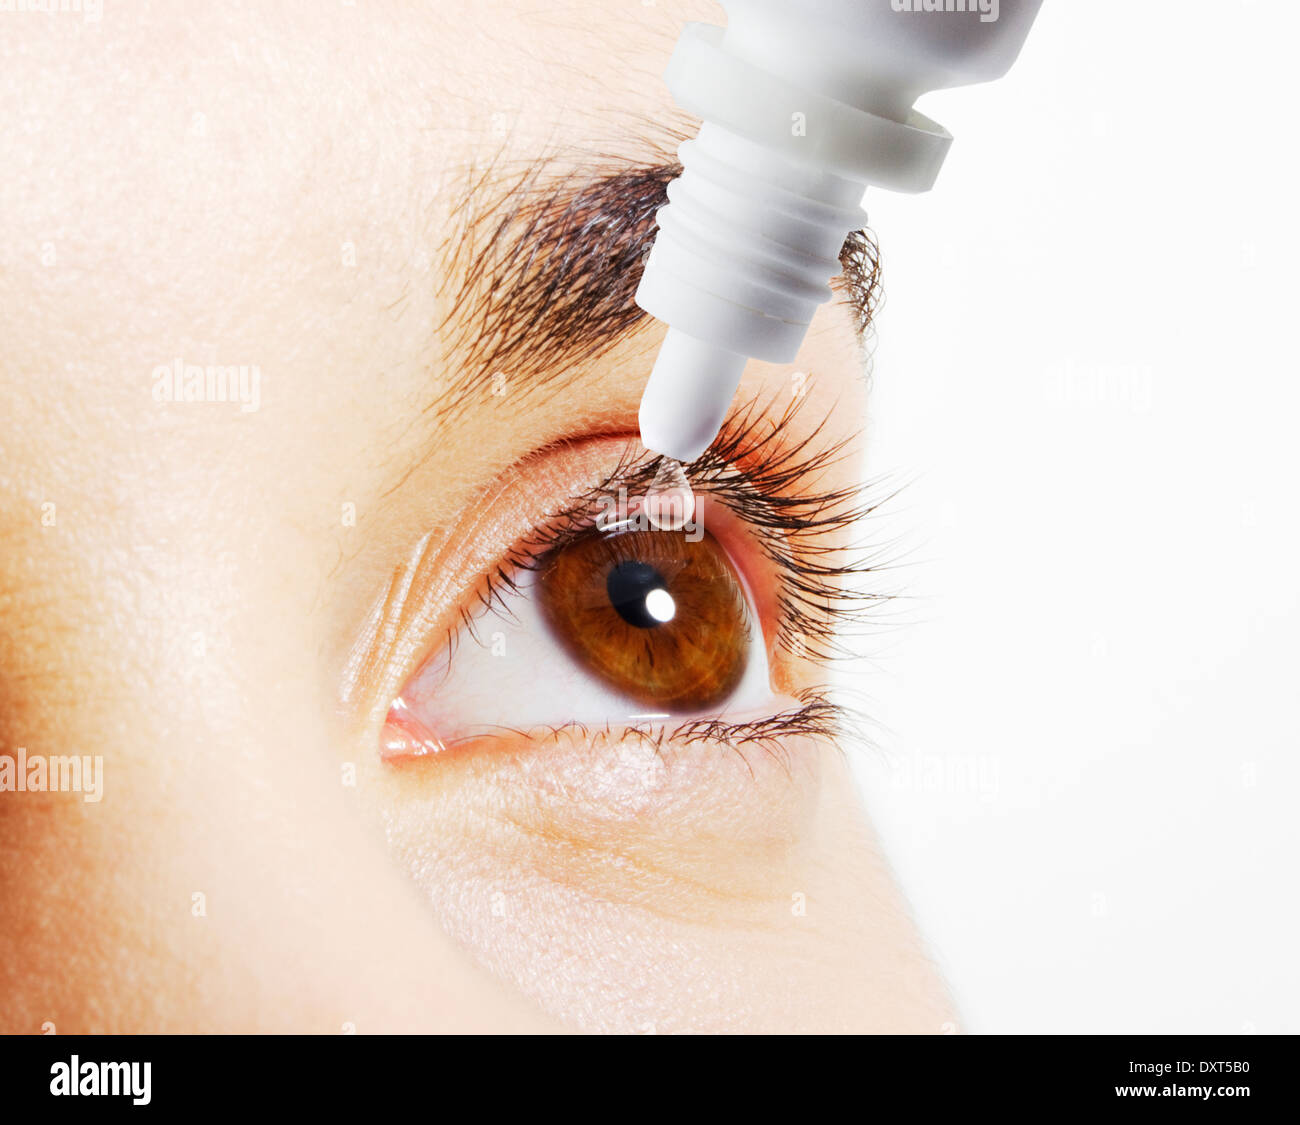 Extreme close up of woman putting Eye drops into eye Banque D'Images